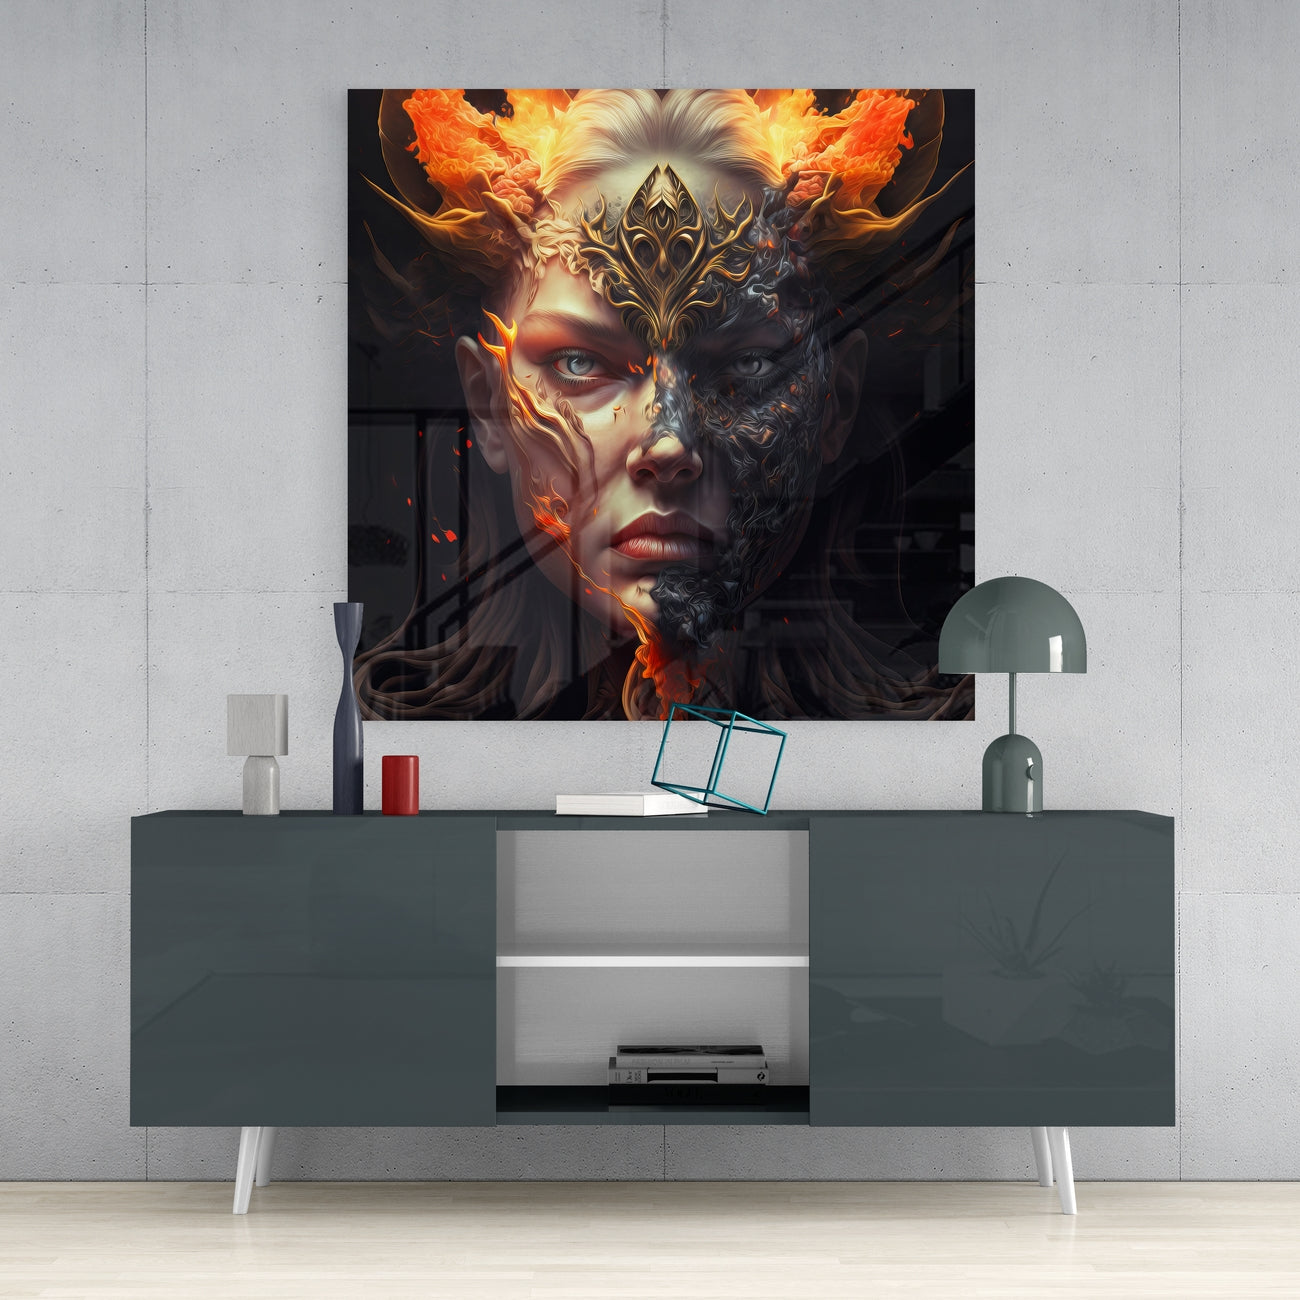 The Wrath of the Woman Glass Wall Art || Designer's Collection